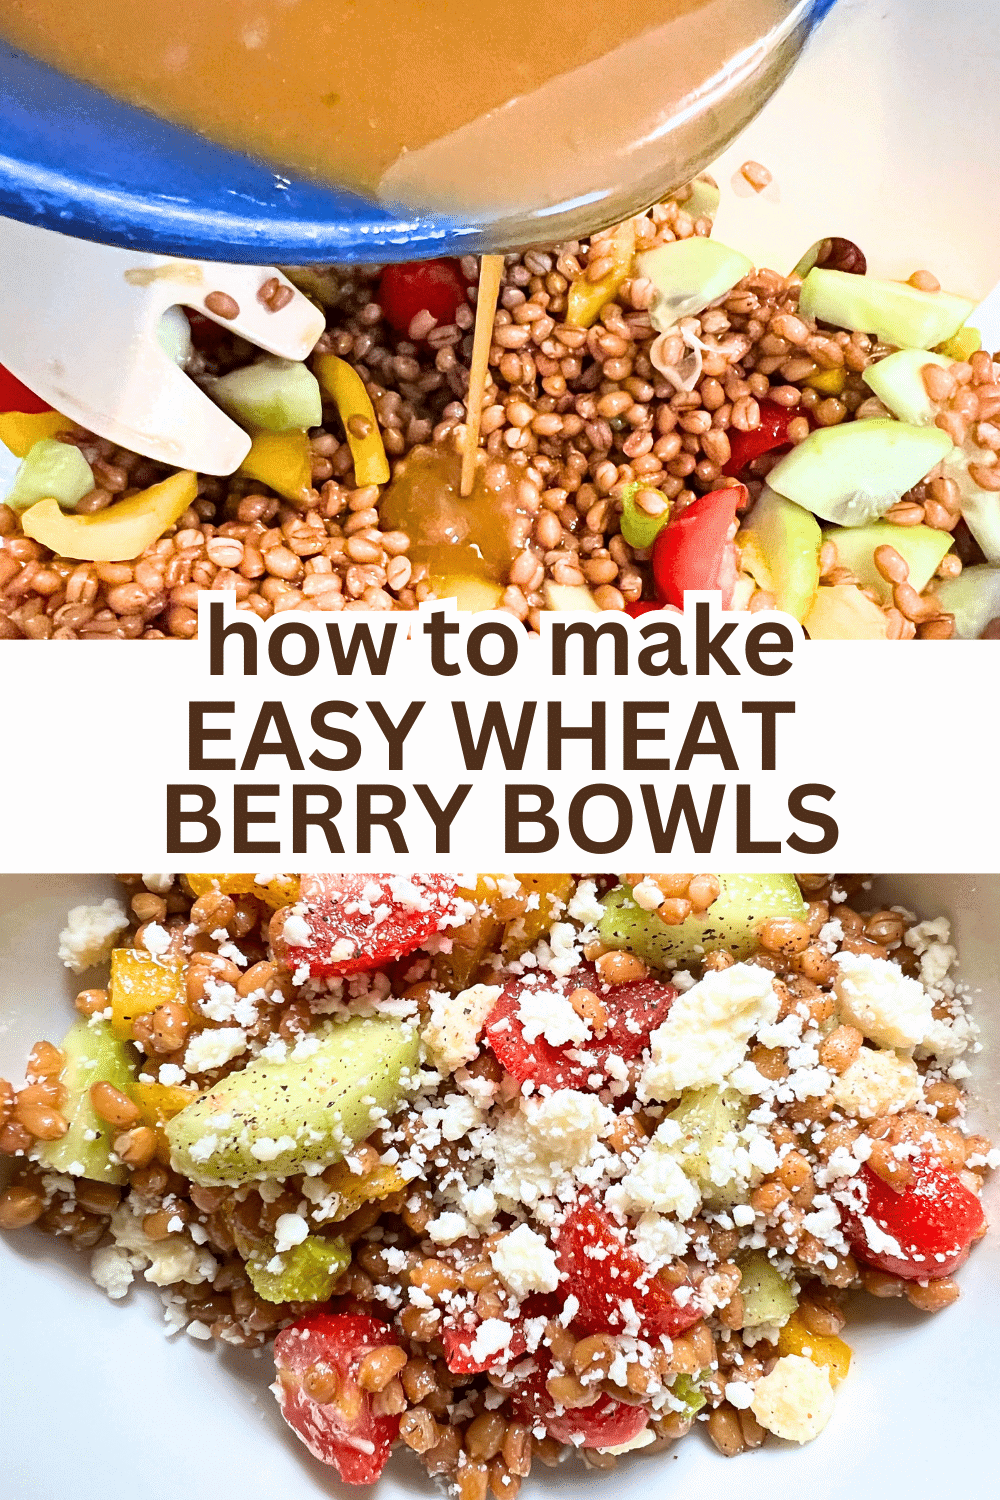 Easy Wheat Berry Bowl Recipe For Lunches or Simple Dinner (HEALTHY BOWL RECIPES) - text over ingredients for wheatberry bowls and then finished wheat berry and vegetable salad